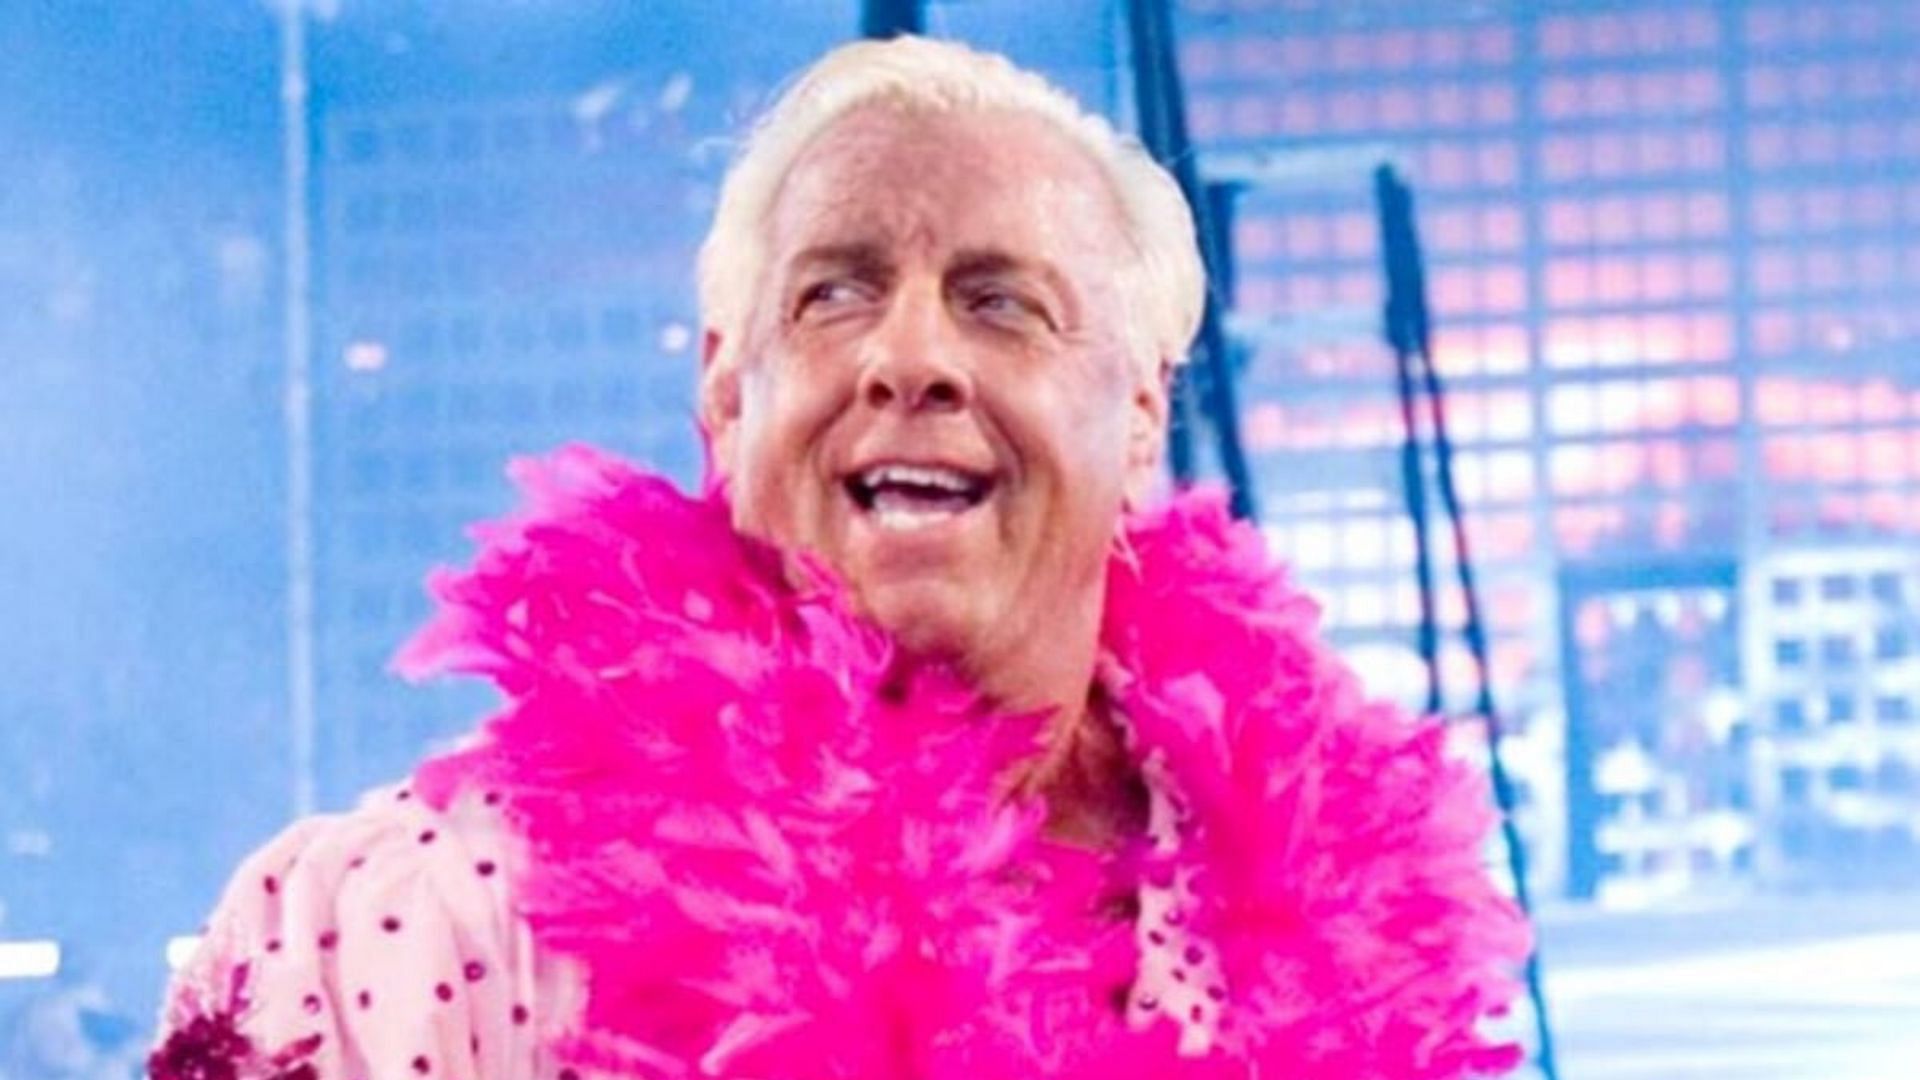 Ric Flair at WrestleMania 22 in 2006!